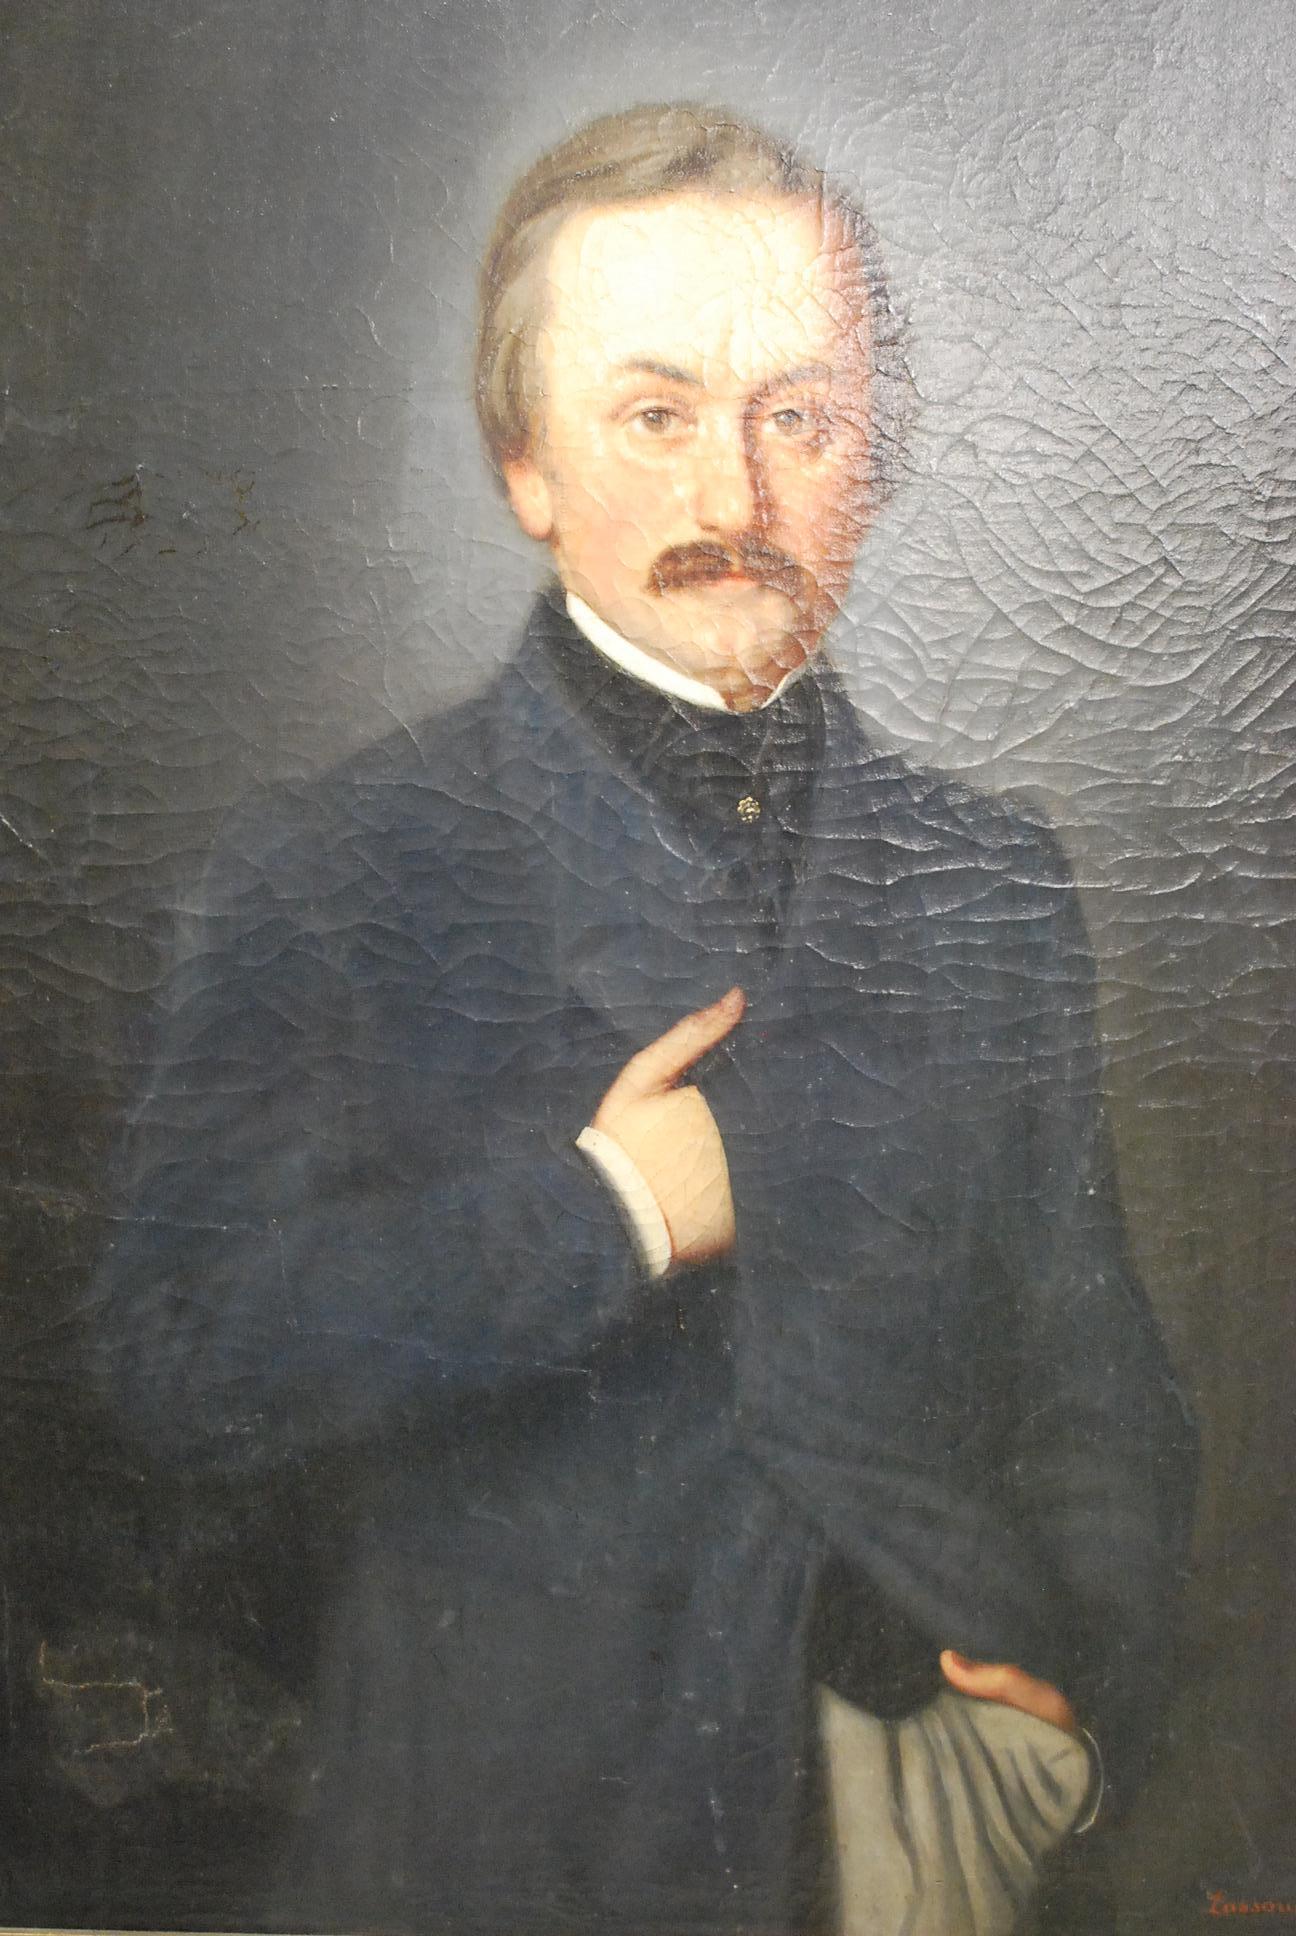 A good quality large oil on canvas portrait of a Victorian gentleman in its original gilt frame, signed Lassoquiere, 1862. A good decorative piece, popular with decorators as a bolt on ancestor. The is a good sense of light, which captures the